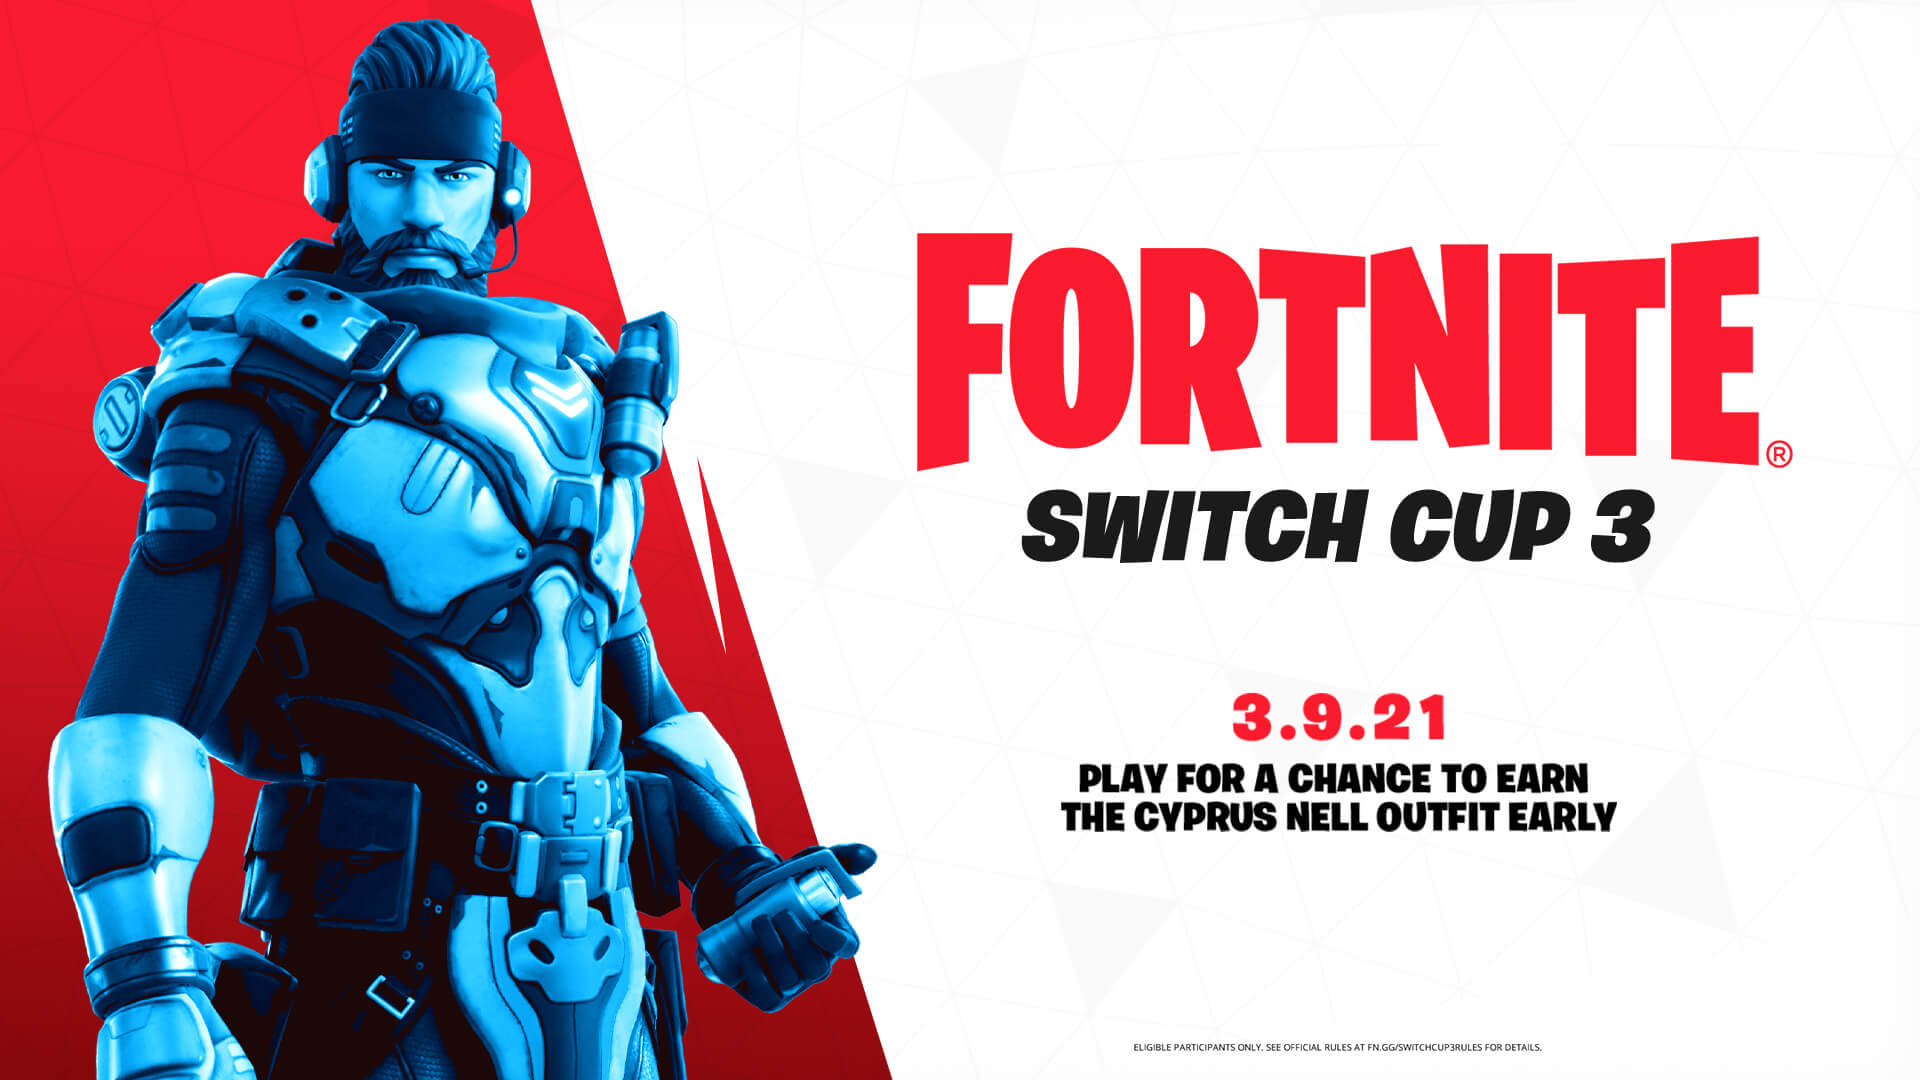 Fortnite Switch Cup 3 takes place March 9, exclusive to Nintendo Switch